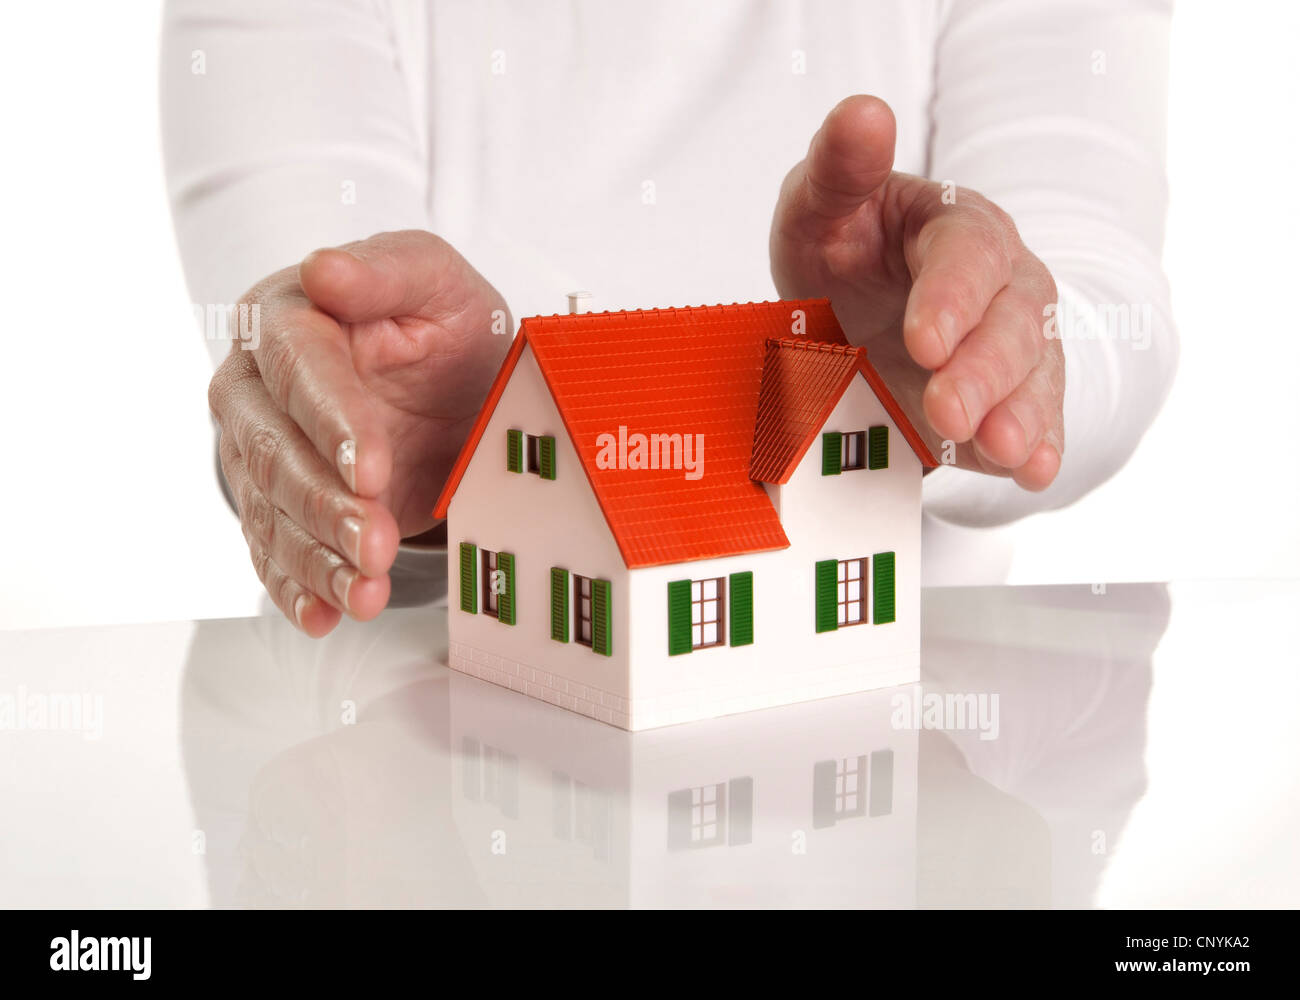 Hands protectively cover an architectural model. Stock Photo